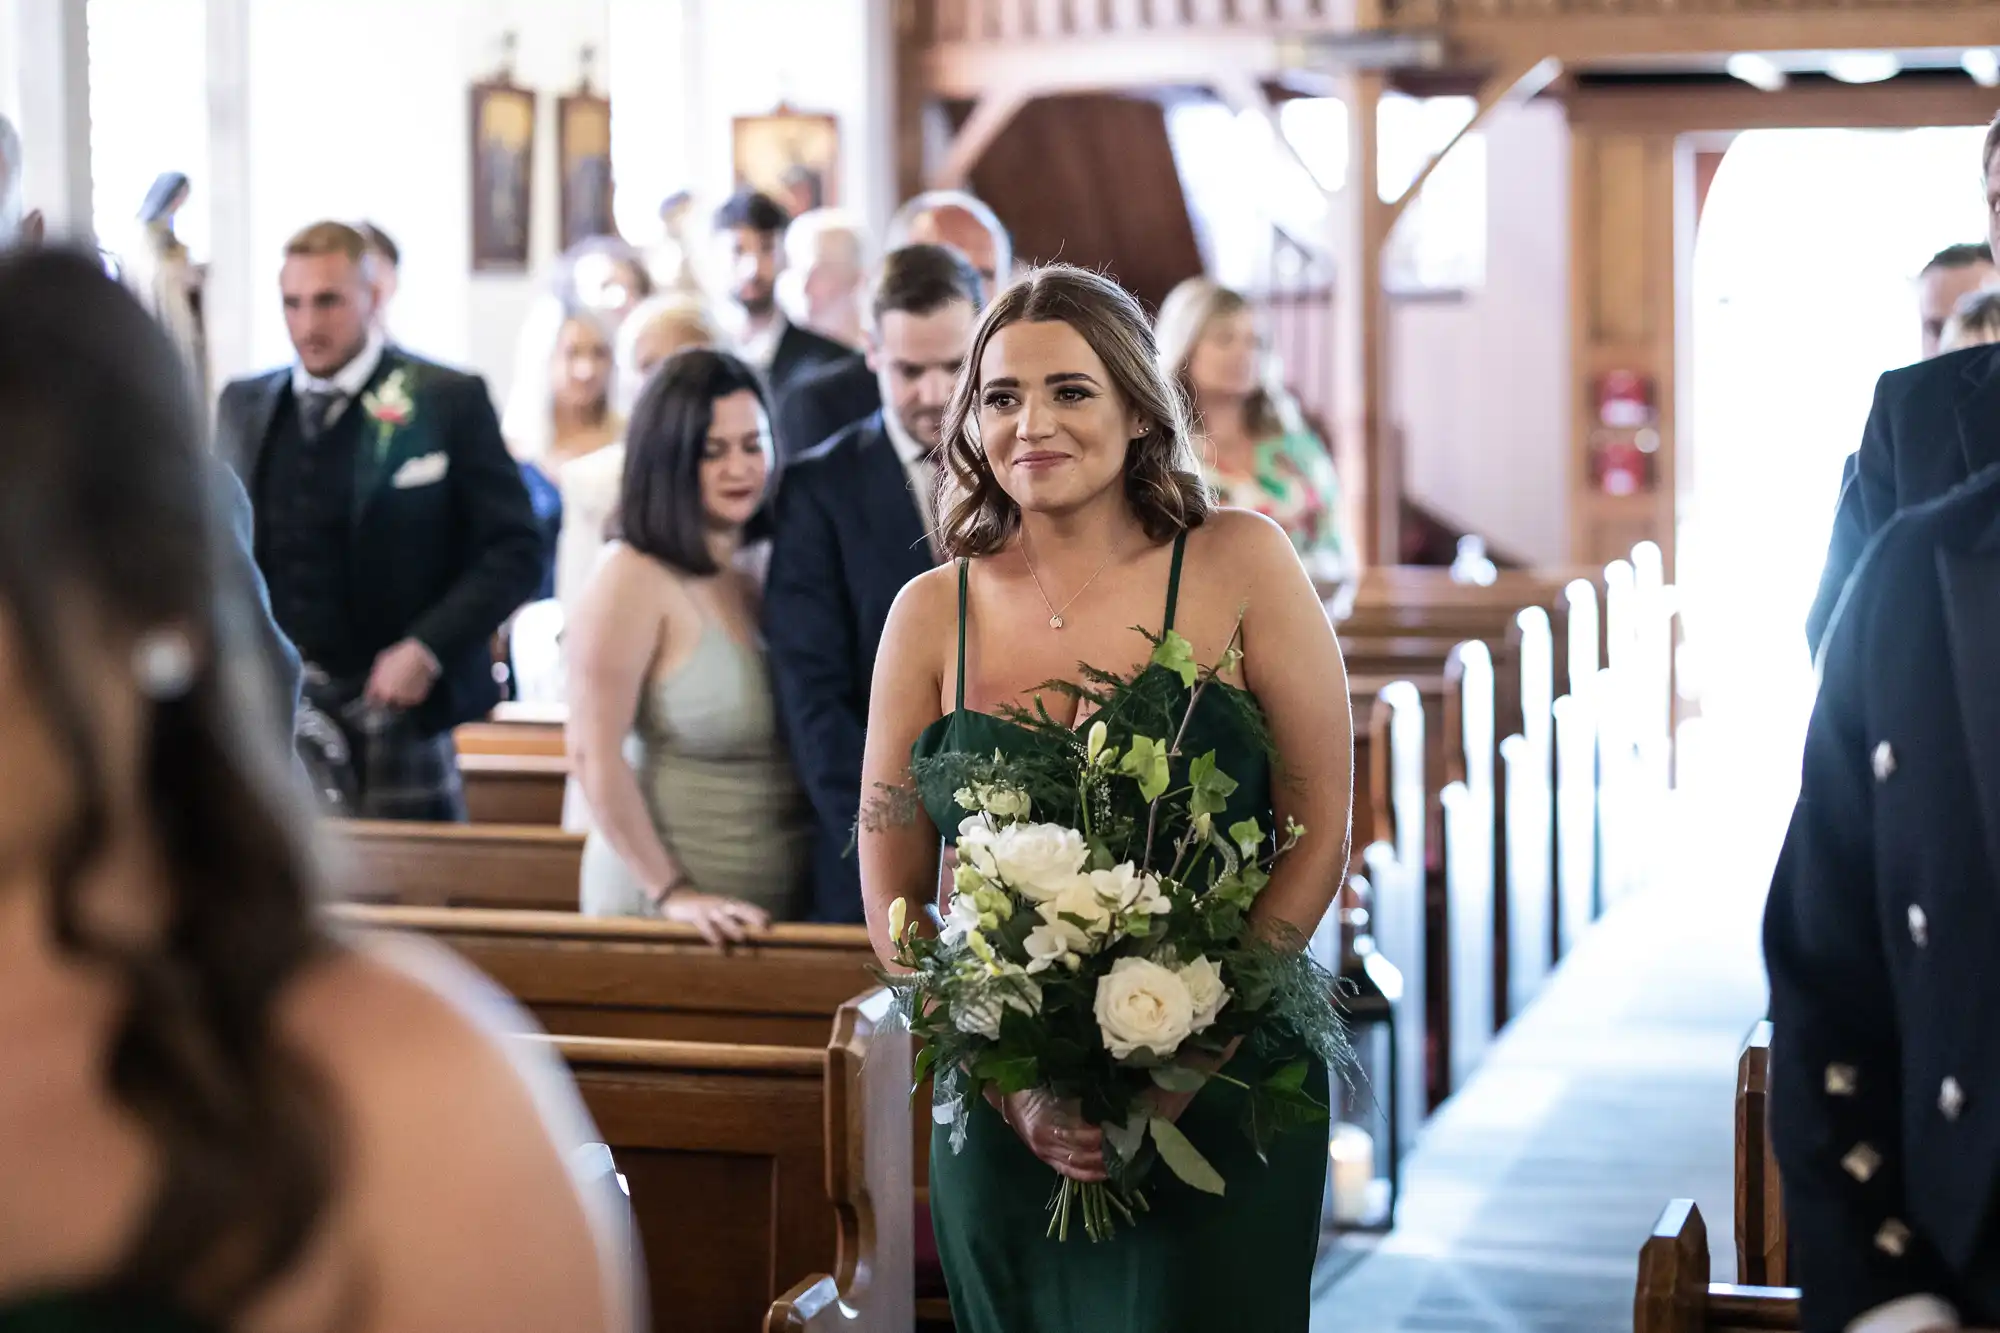 A bridesmaid in a green dress holding a bouquet walks down the aisle in a church, smiling, with guests watching.